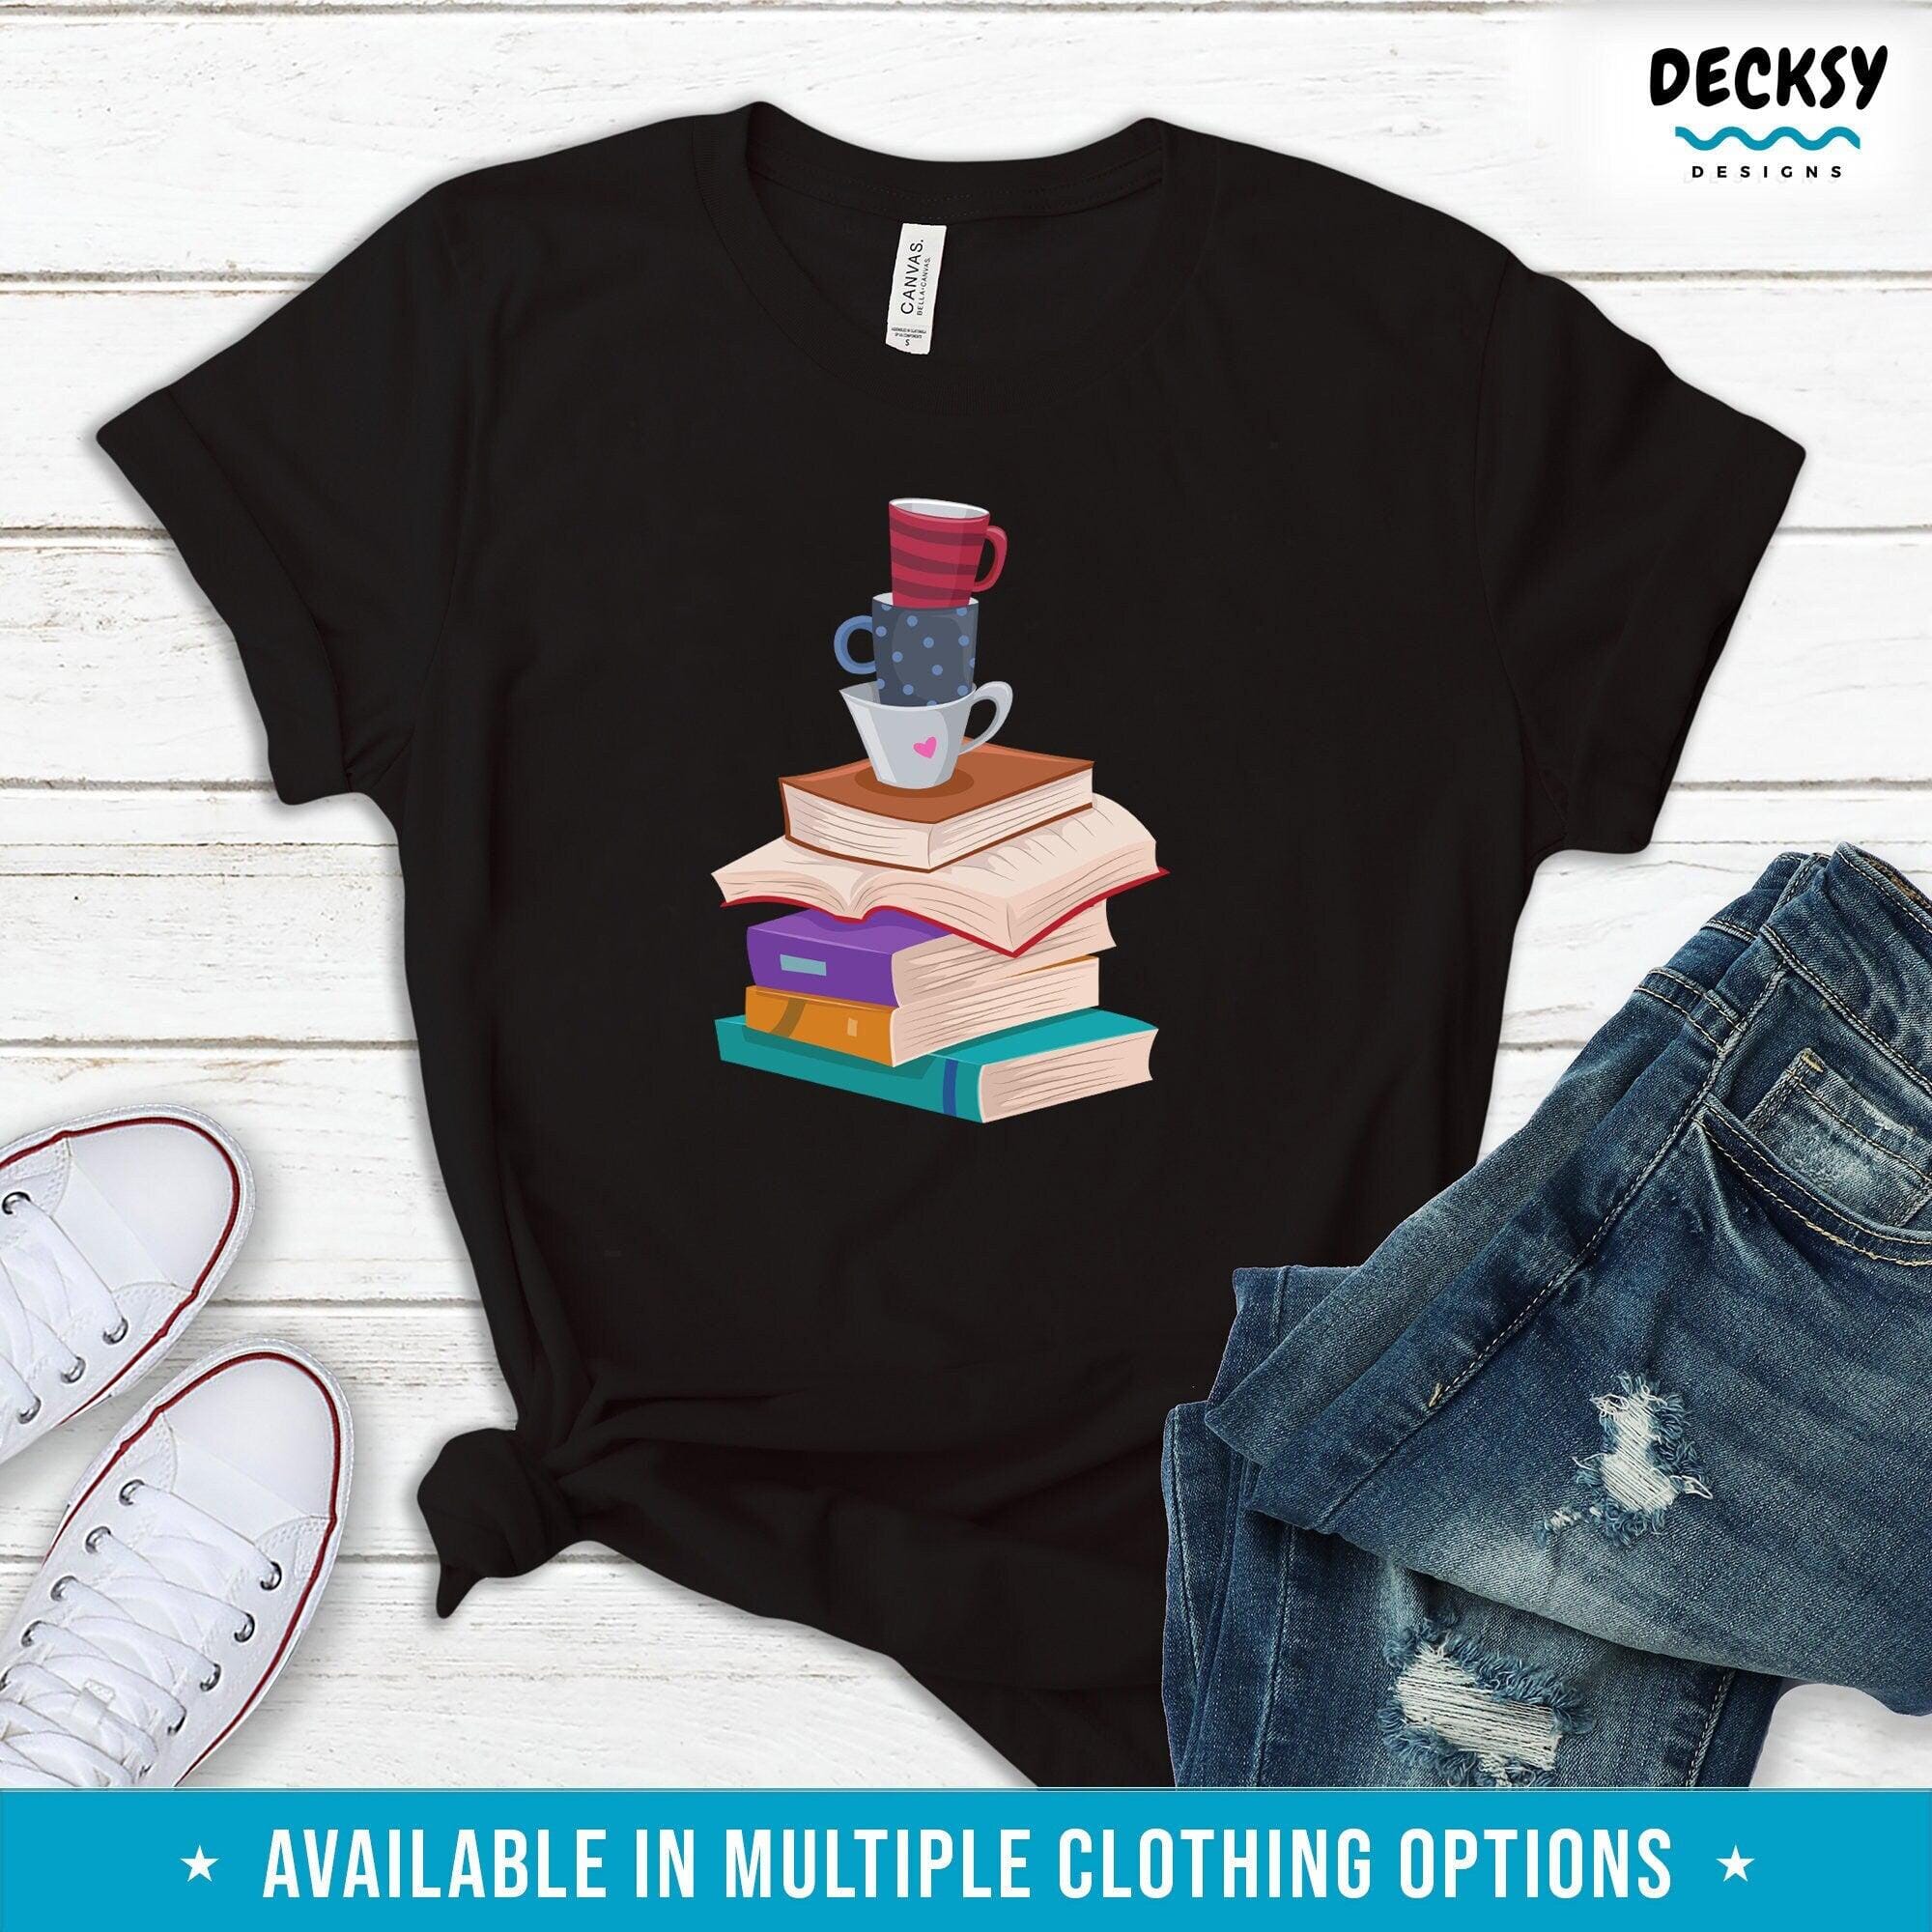 Books And Coffee Shirt, Gift For Reader-Clothing:Gender-Neutral Adult Clothing:Tops & Tees:T-shirts:Graphic Tees-DecksyDesigns